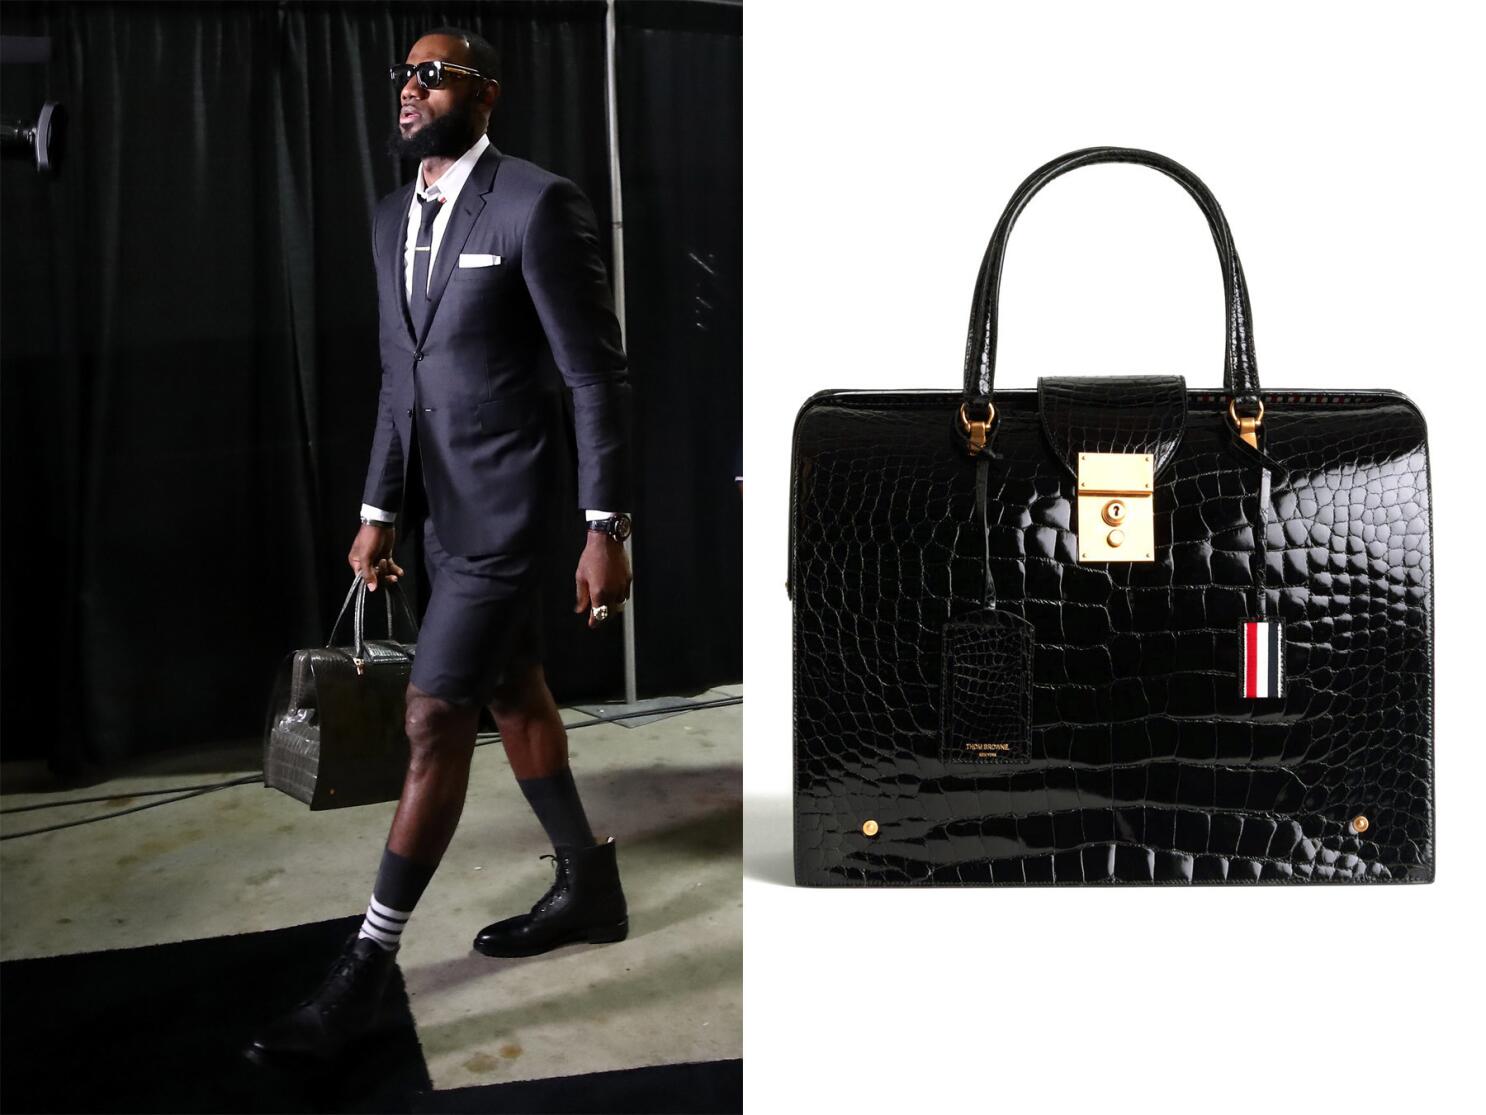 LeBron James carries a $41,000 bag. Here's your chance to get into the man- bag game with these picks - Los Angeles Times